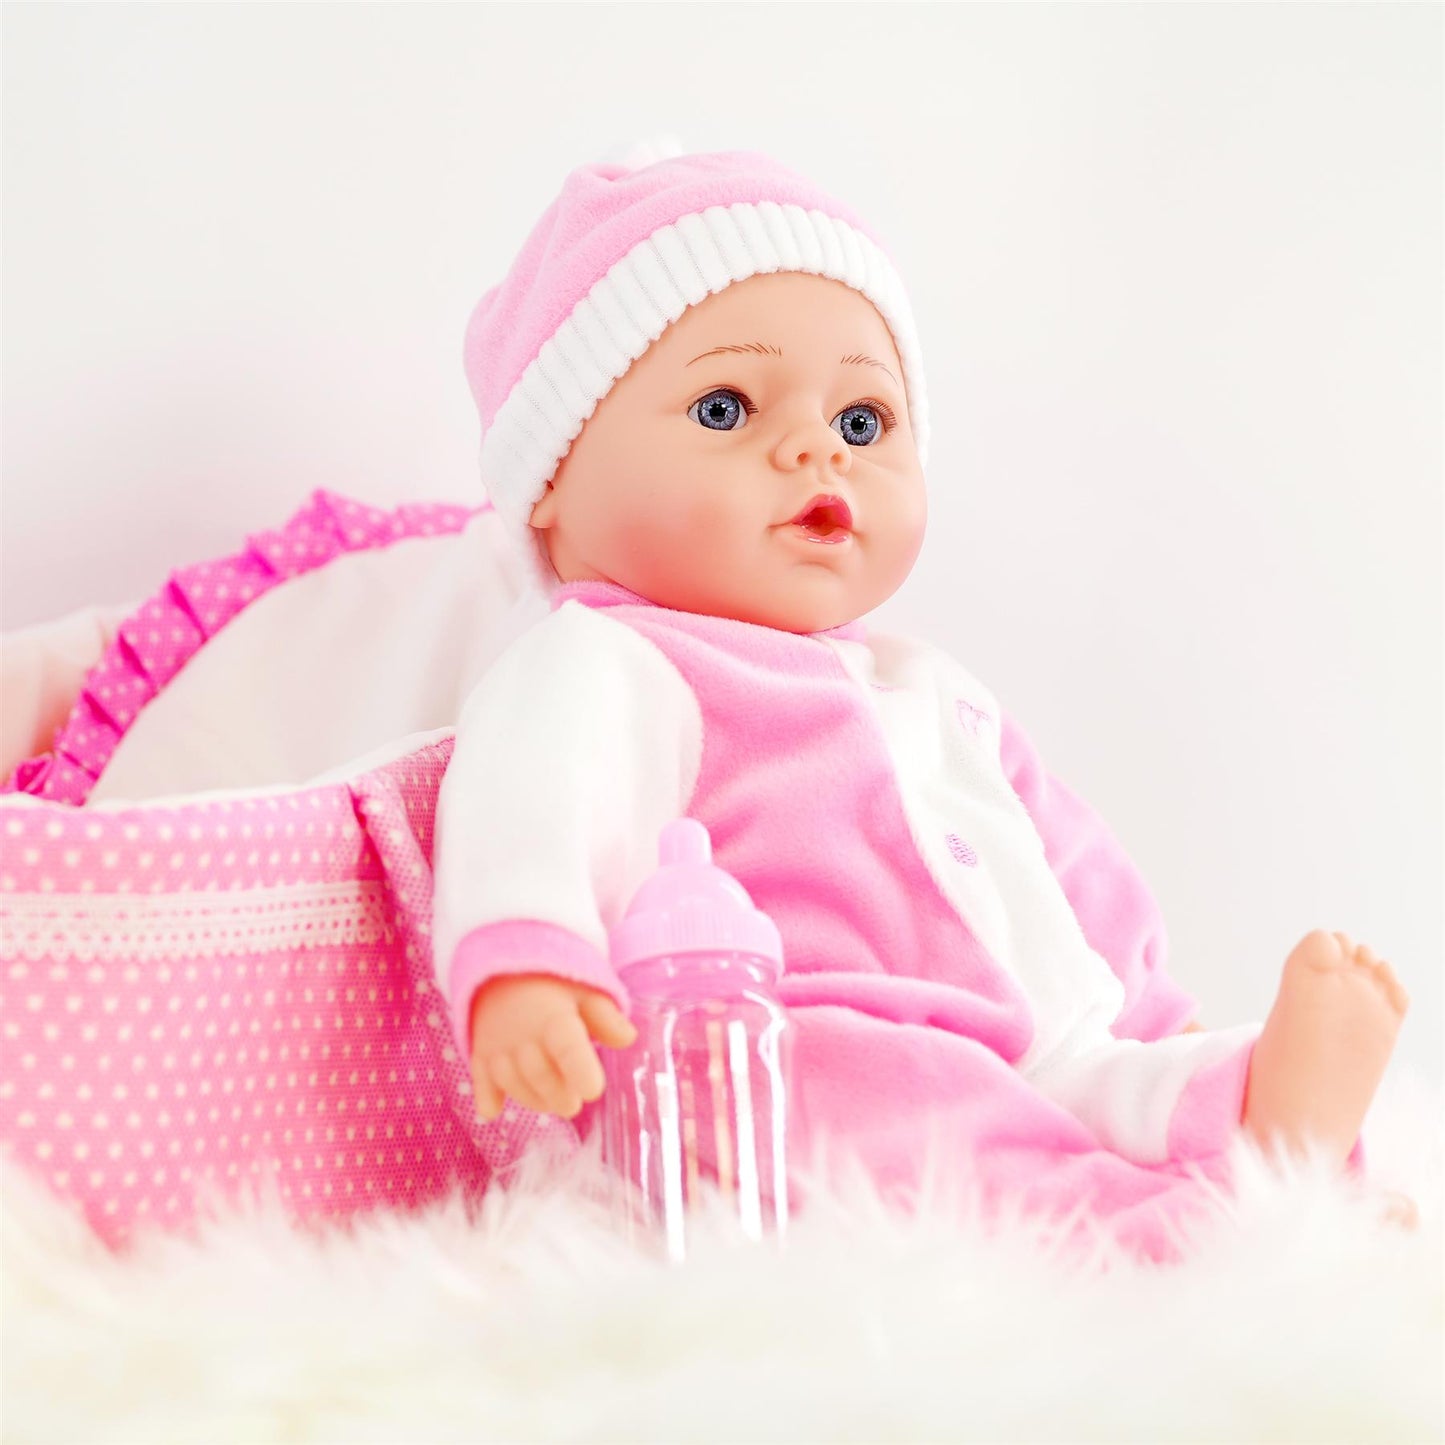 BiBi Baby Doll in Carry Cot (38 cm / 15") by The Magic Toy Shop - UKBuyZone